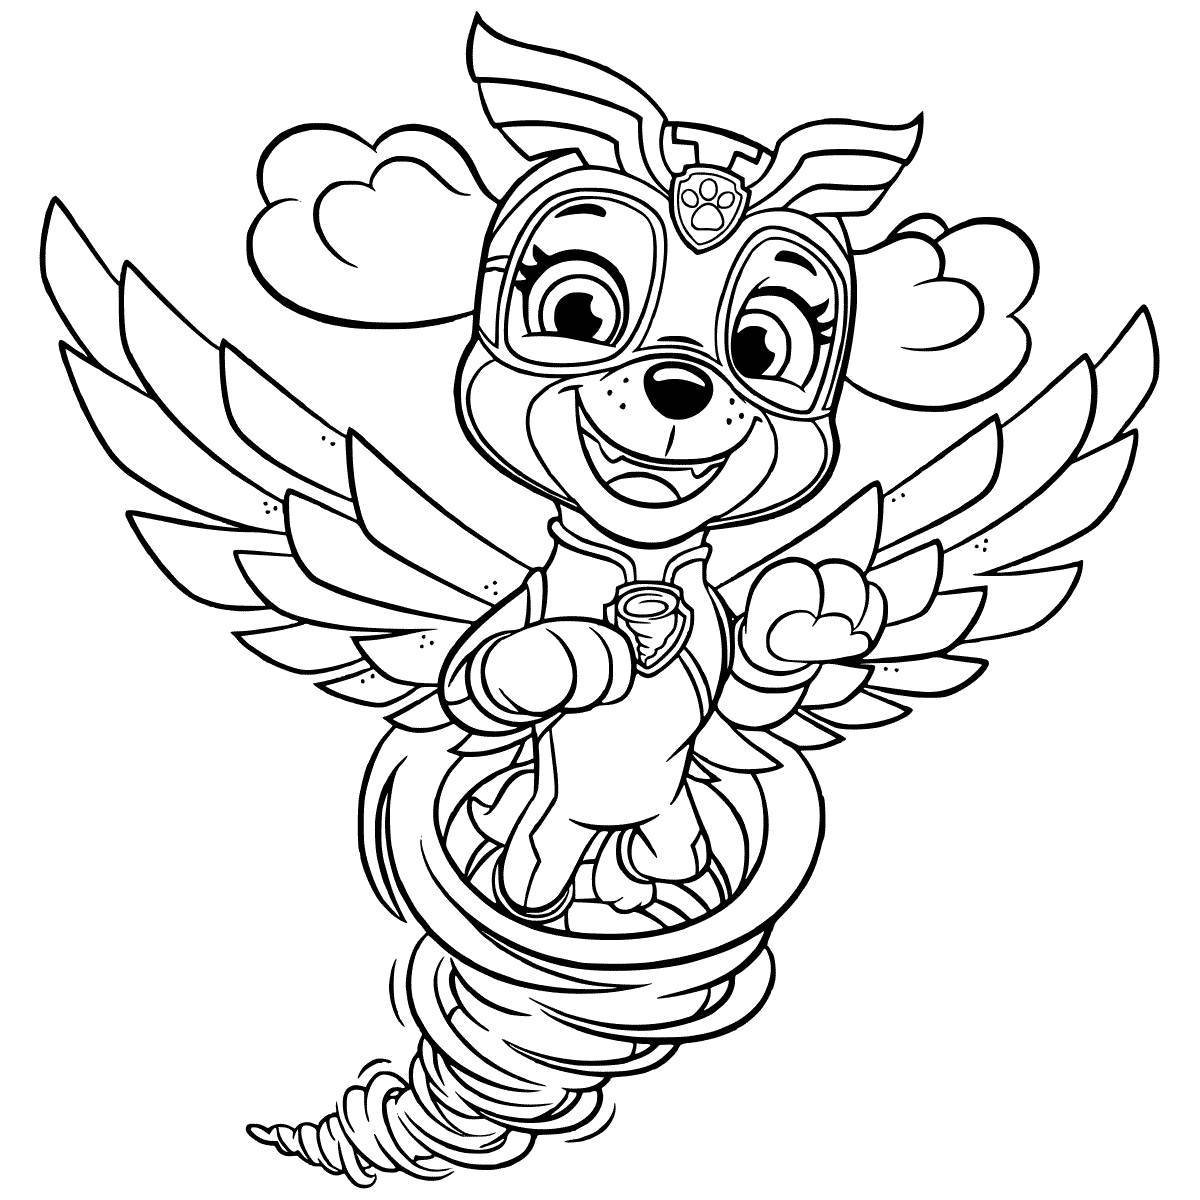 Skye puppy coloring book